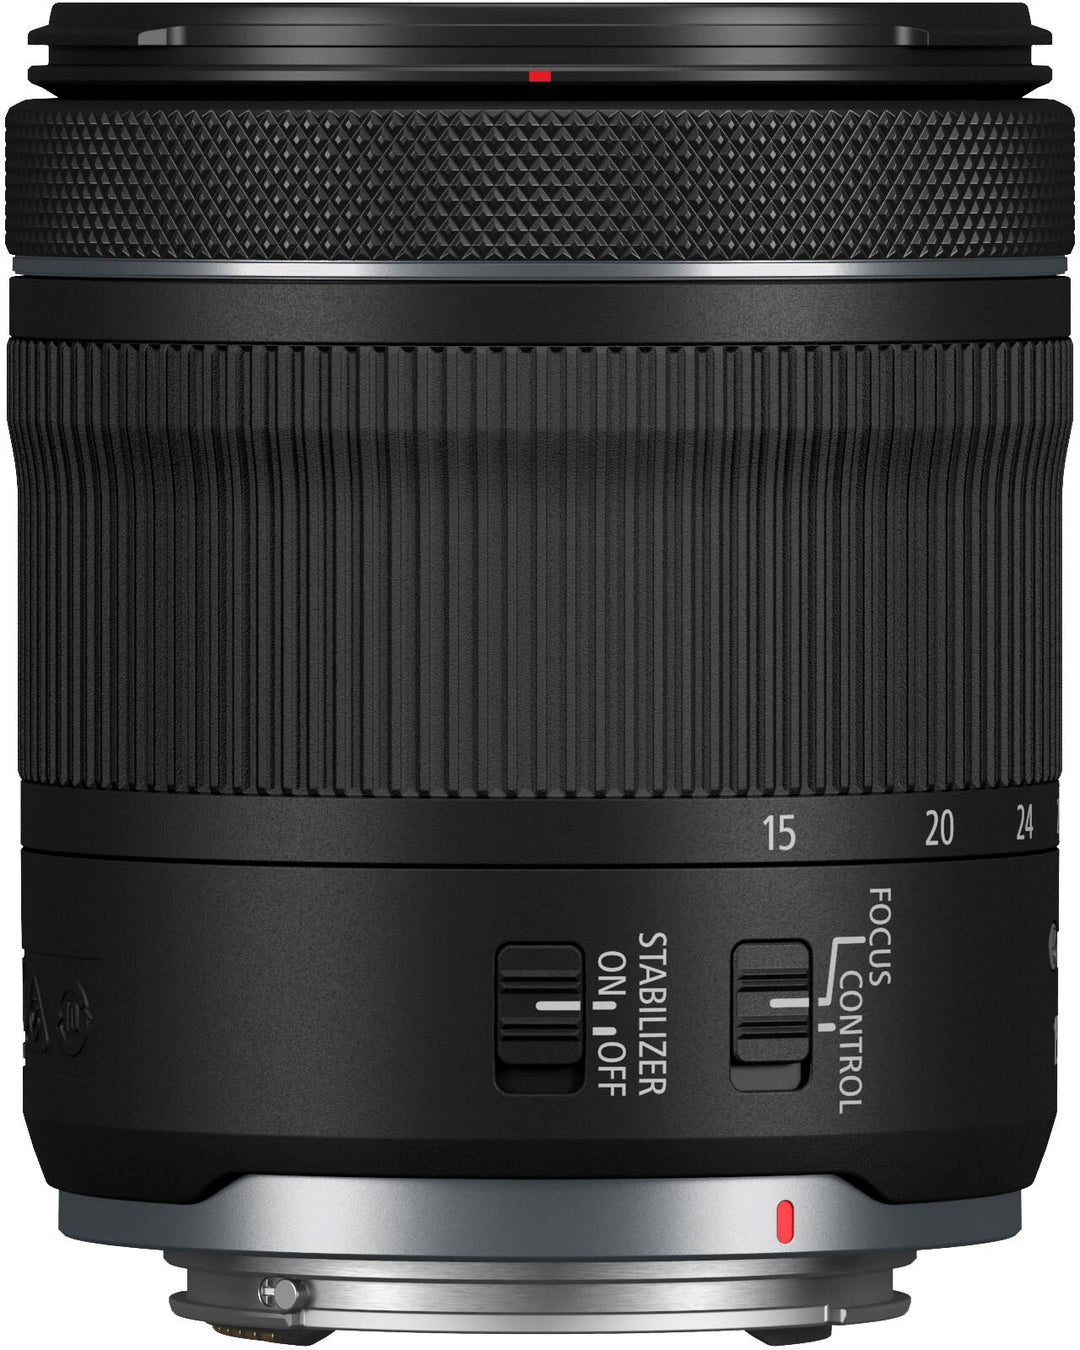 Canon - RF 15-30mm f/4.5-6.3 IS STM Ultra-Wide Angle Zoom Lens - Black_5